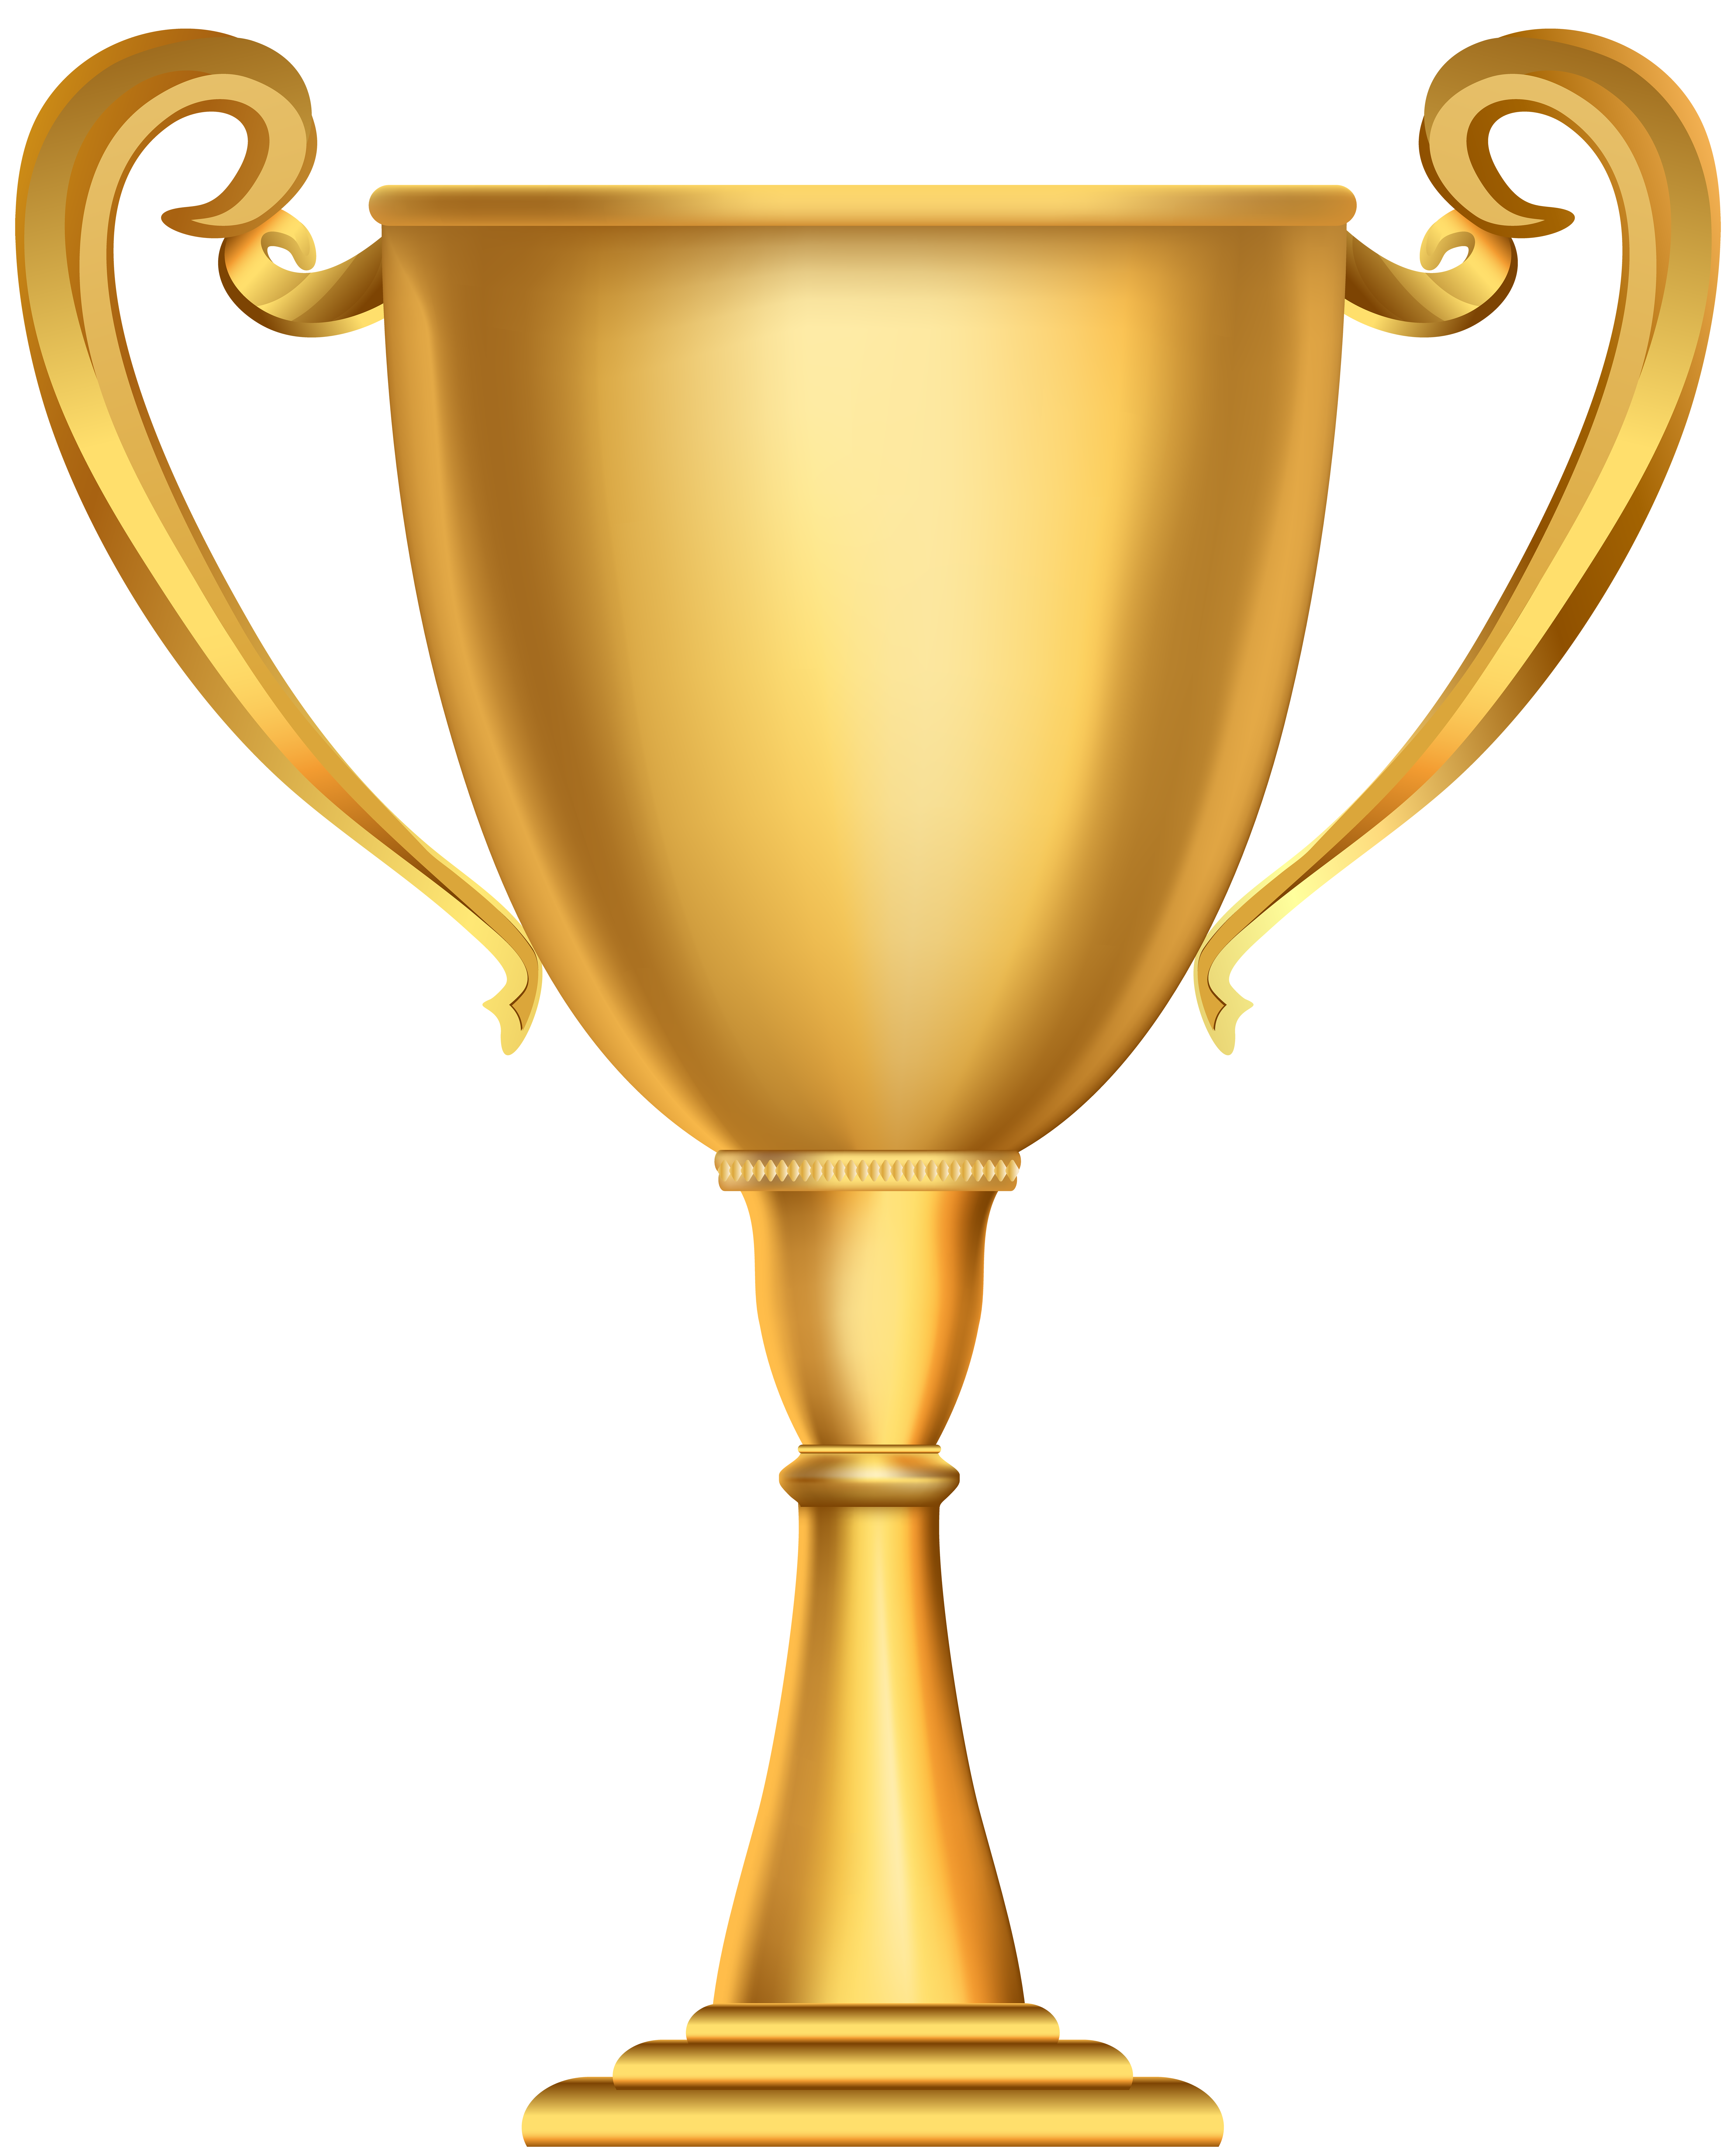 Gold Cup Trophy PNG Clip Art Image​ | Gallery Yopriceville - High-Quality  Free Images and Transparent PNG Clipart